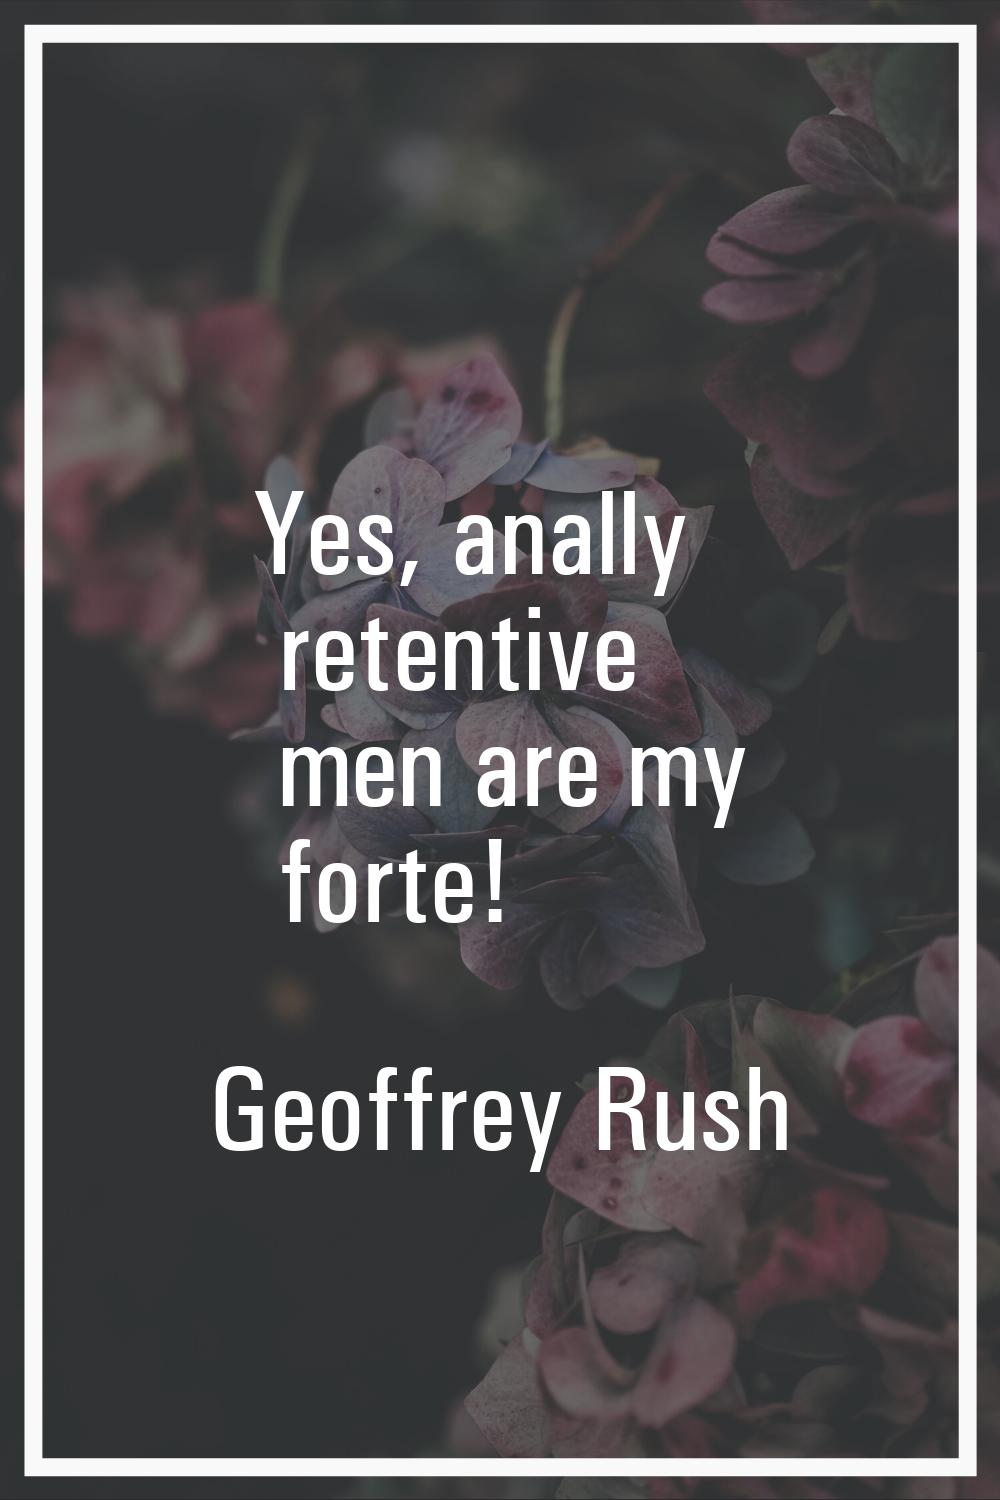 Yes, anally retentive men are my forte!